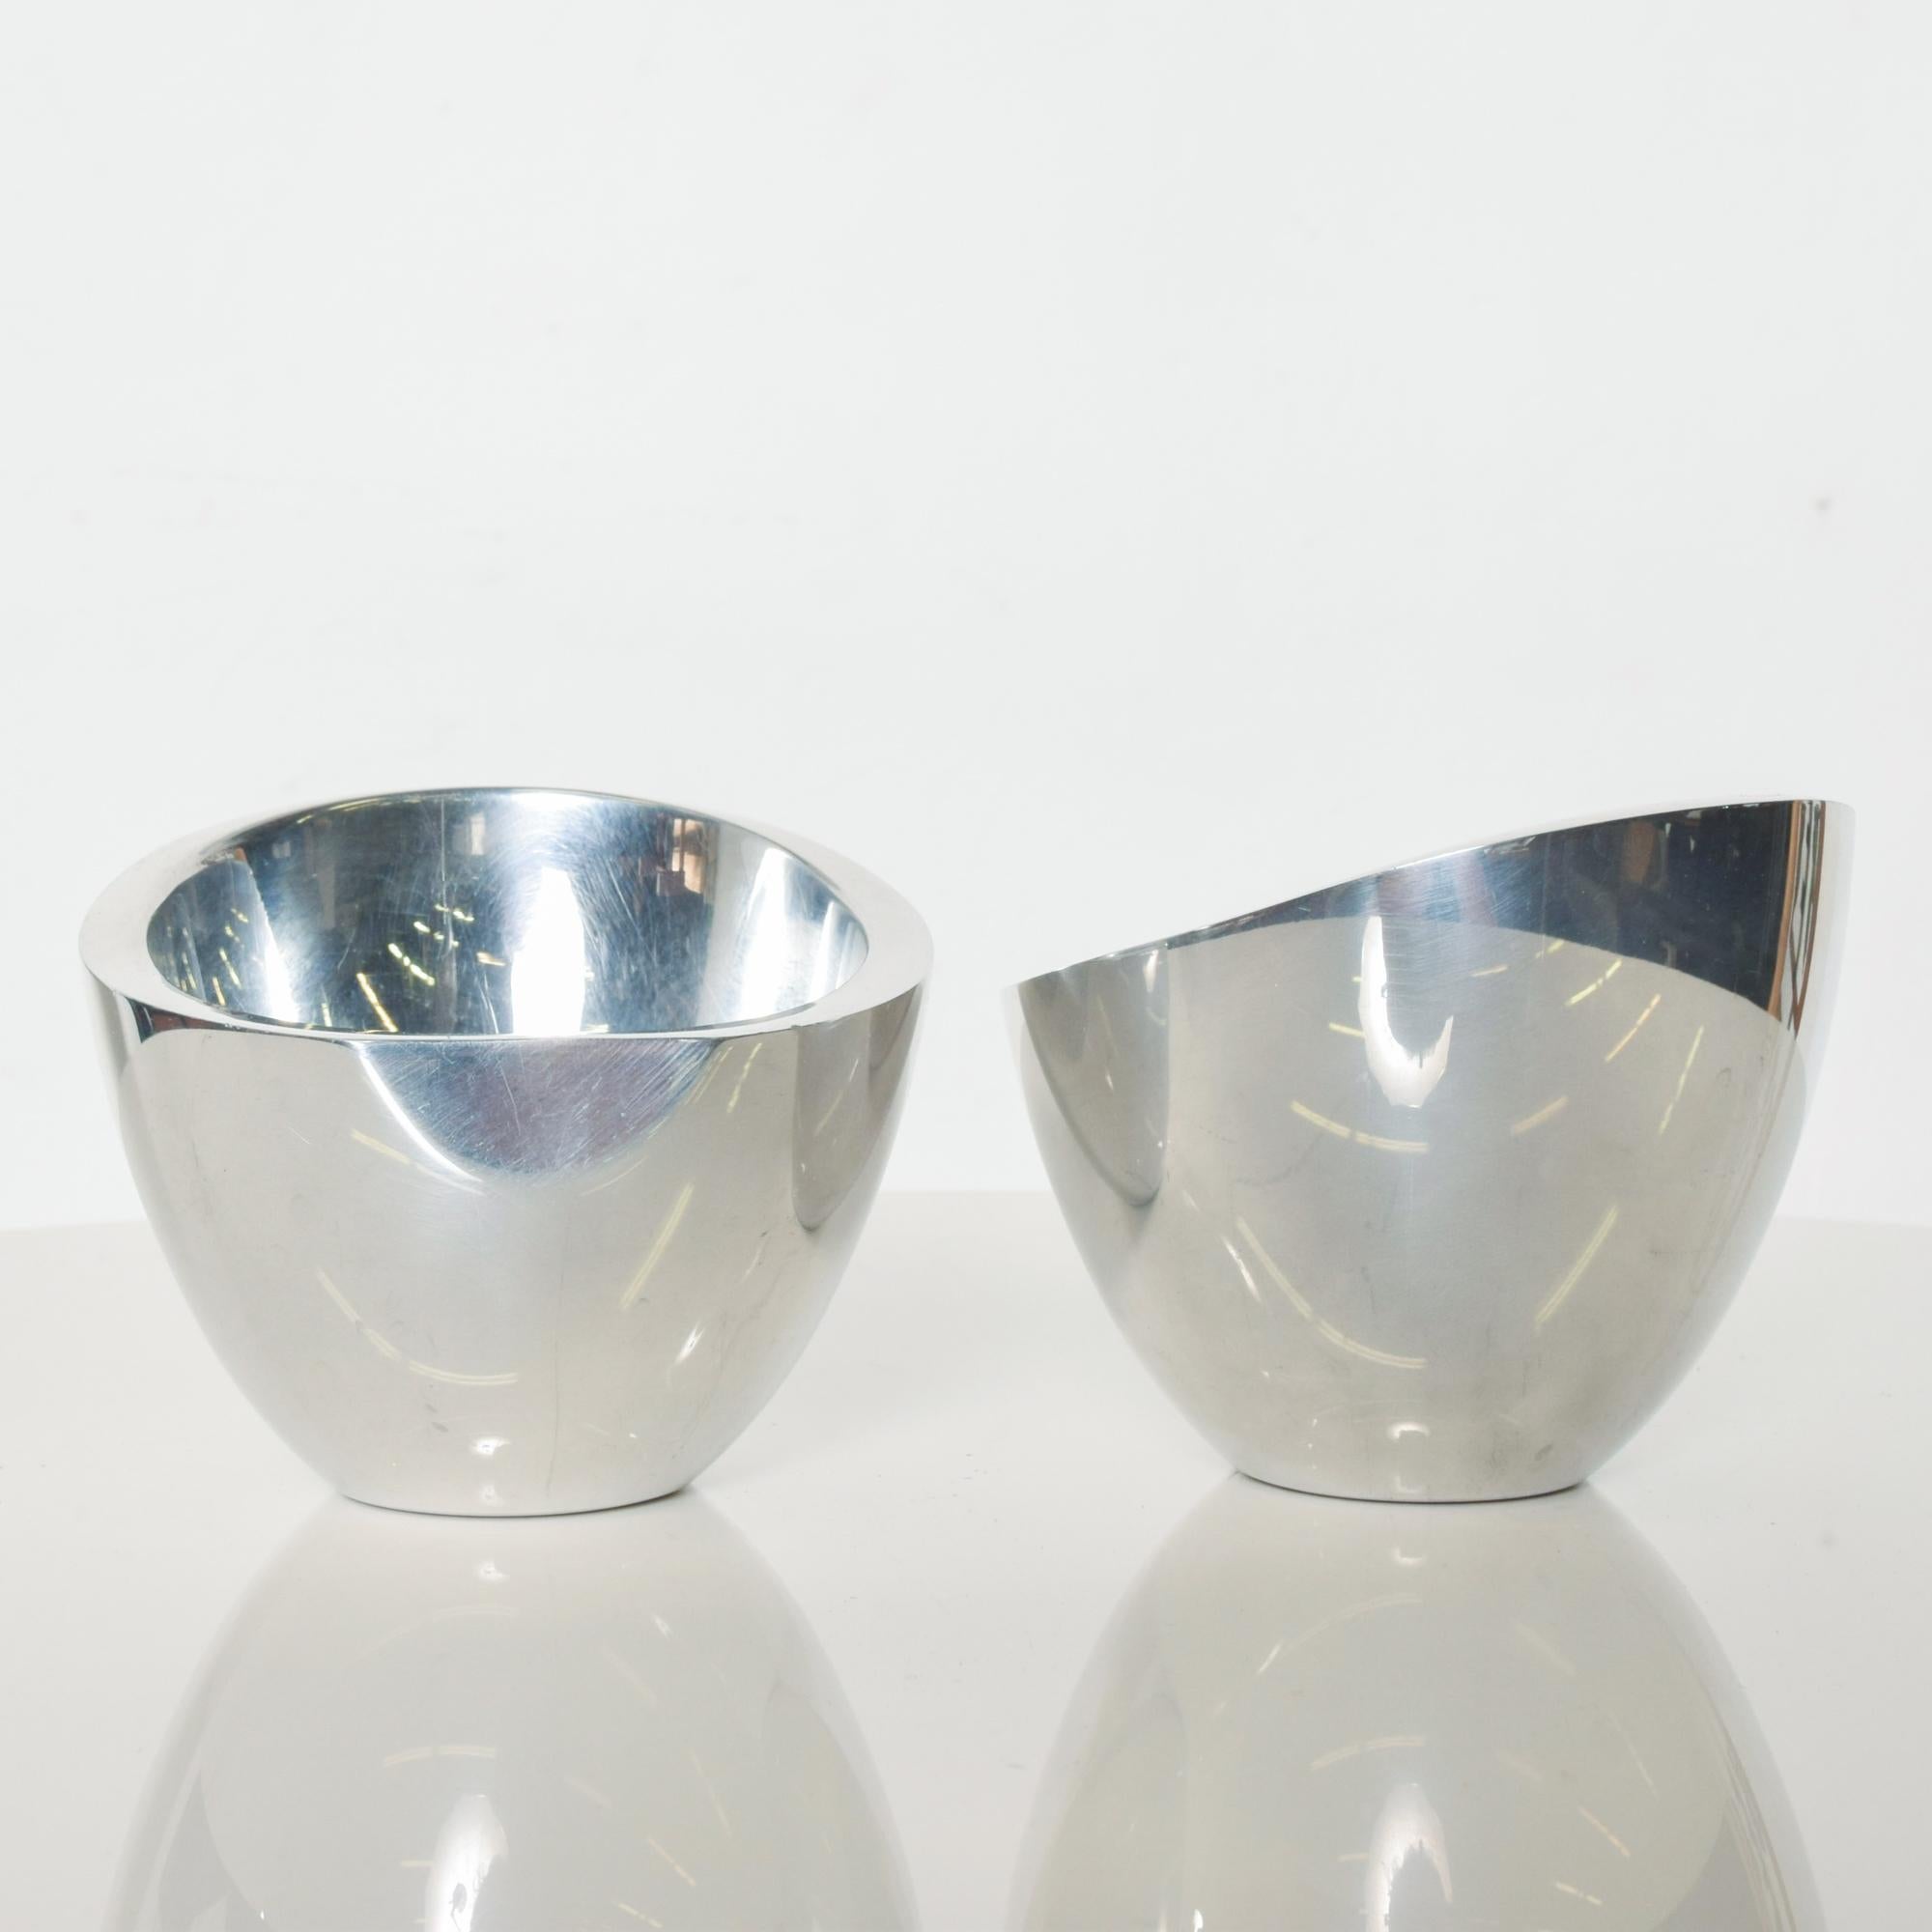 Fabulous sculptural pair of petite modern decorative condiment bowls in aluminum by Neil Cohen for NAMBE.
Signed underneath. Preowned unrestored good condition. Solid and thick quality made in USA by Nambe in Santa Fe, New Mexico, 2004
Measures: